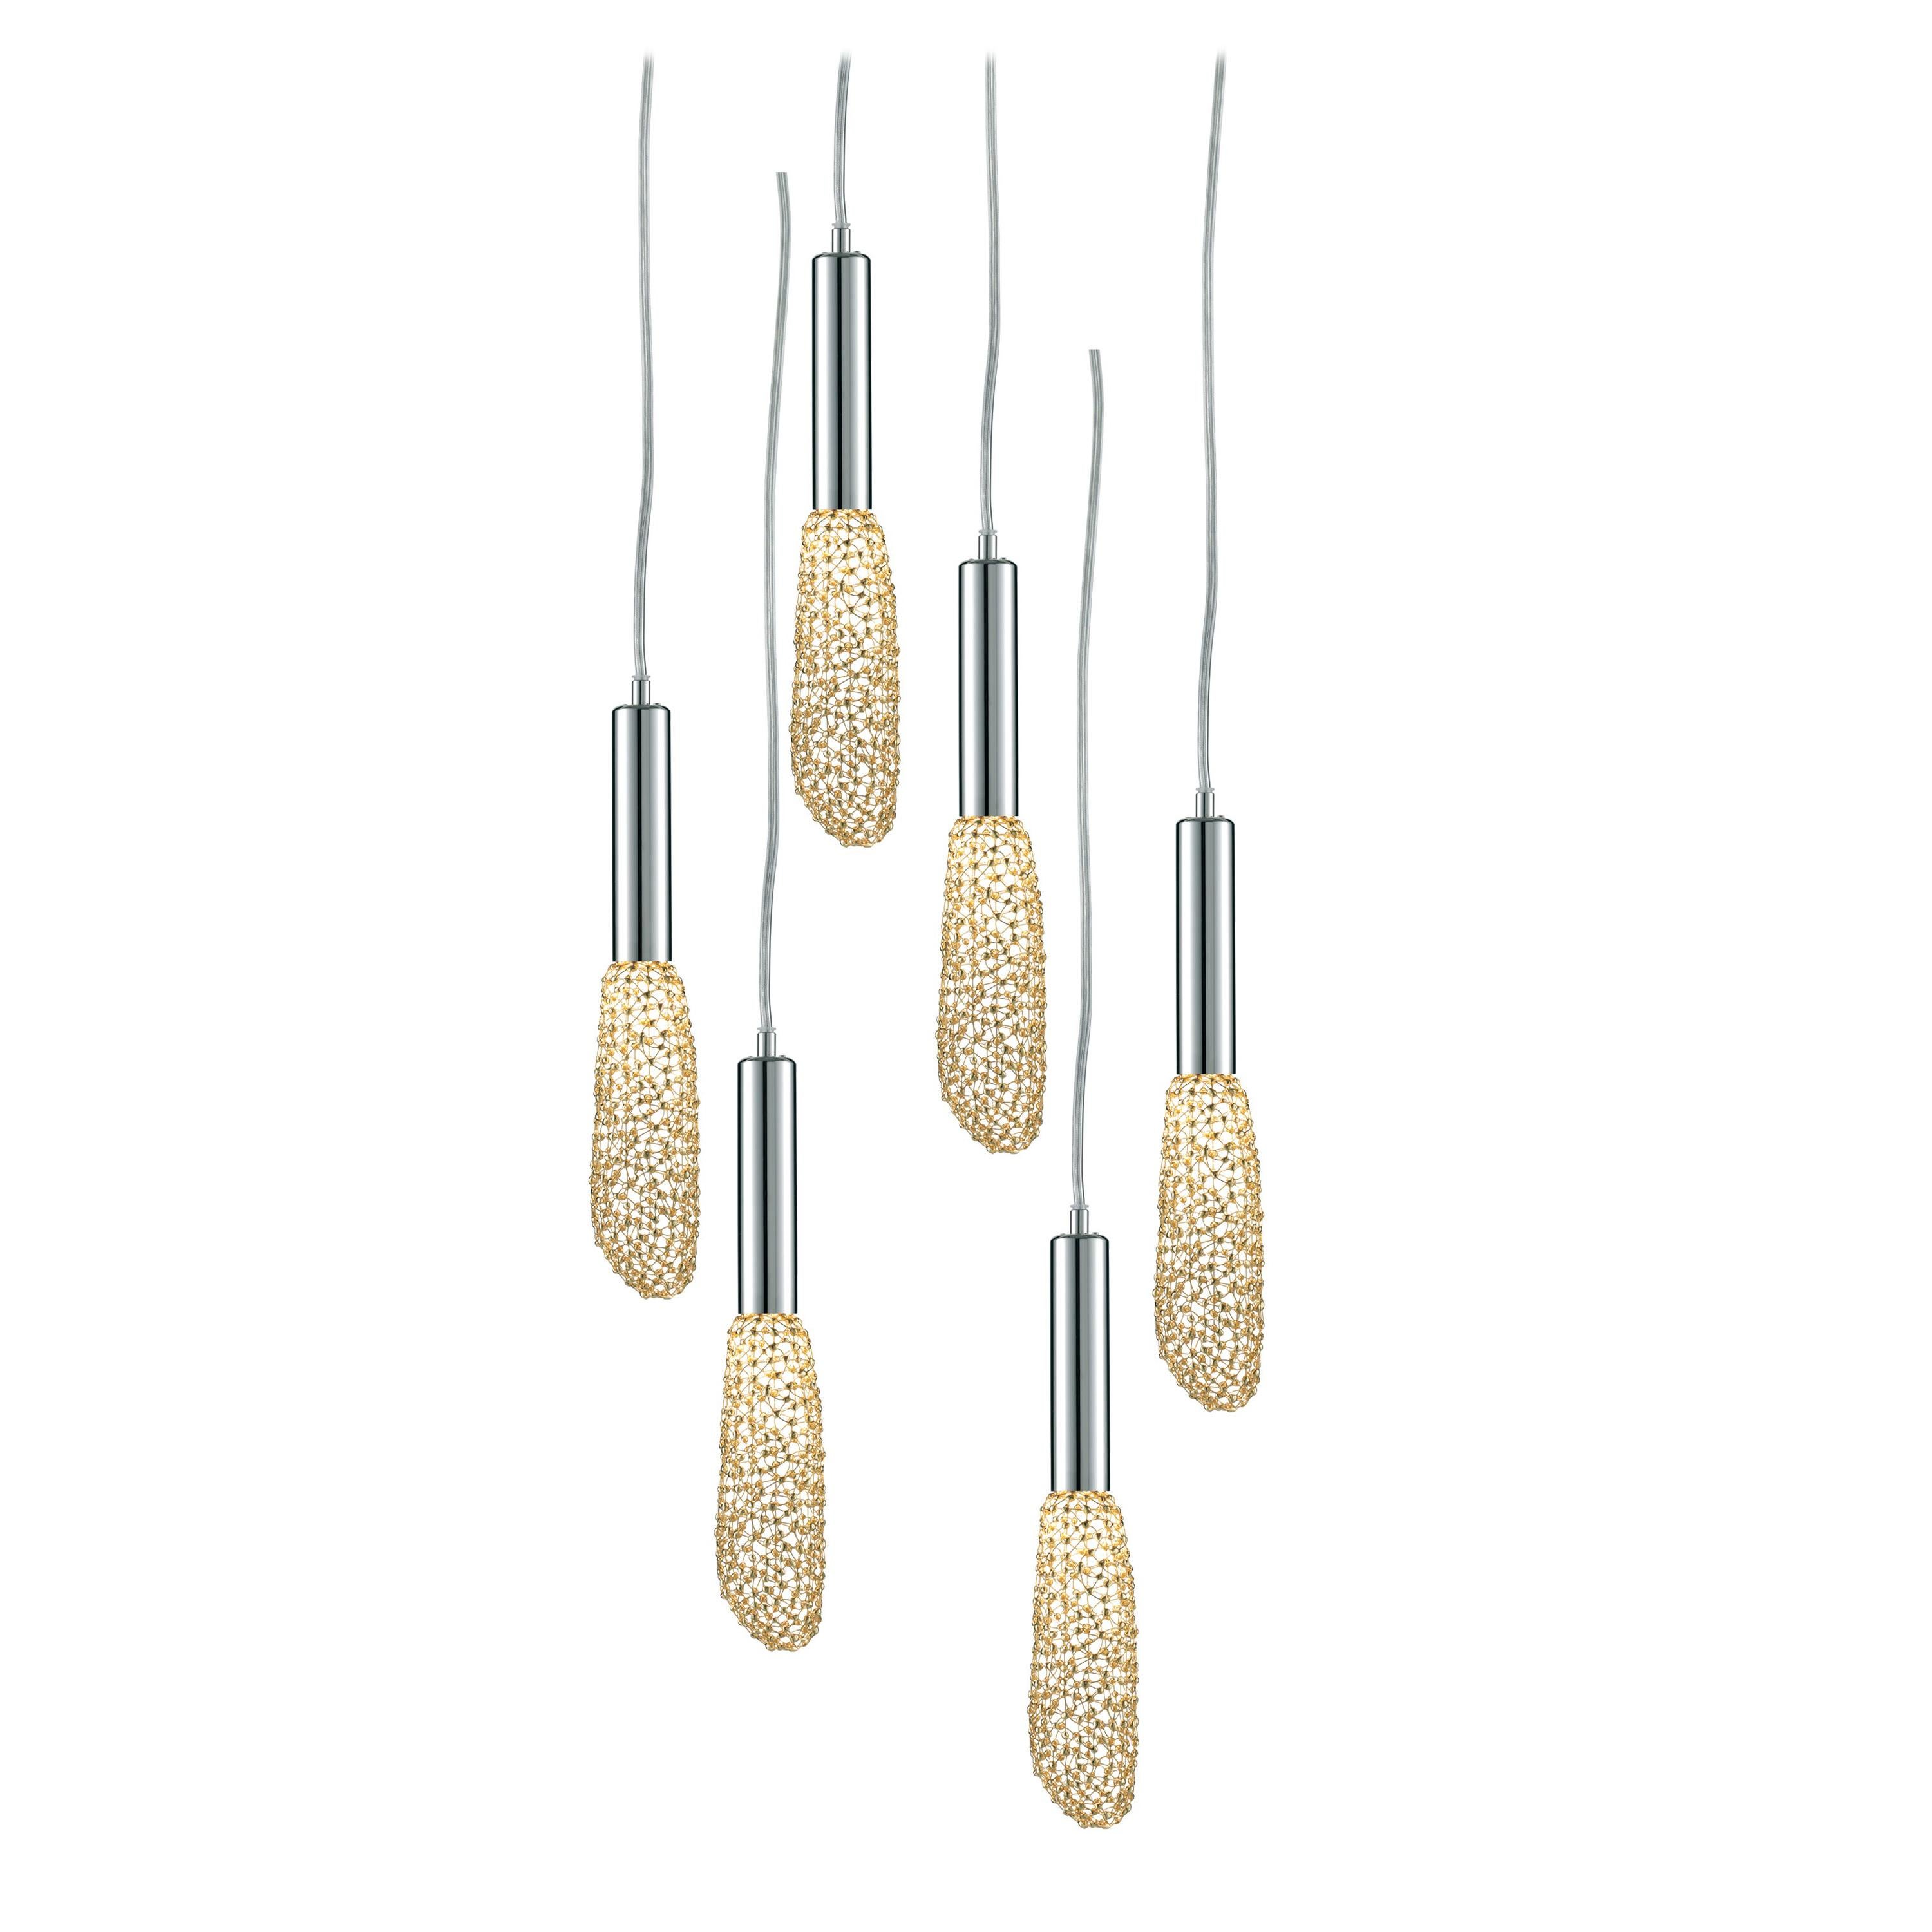 Firmament-1 'Gold' by Ango, Handcrafted Chandelier for 21st Century